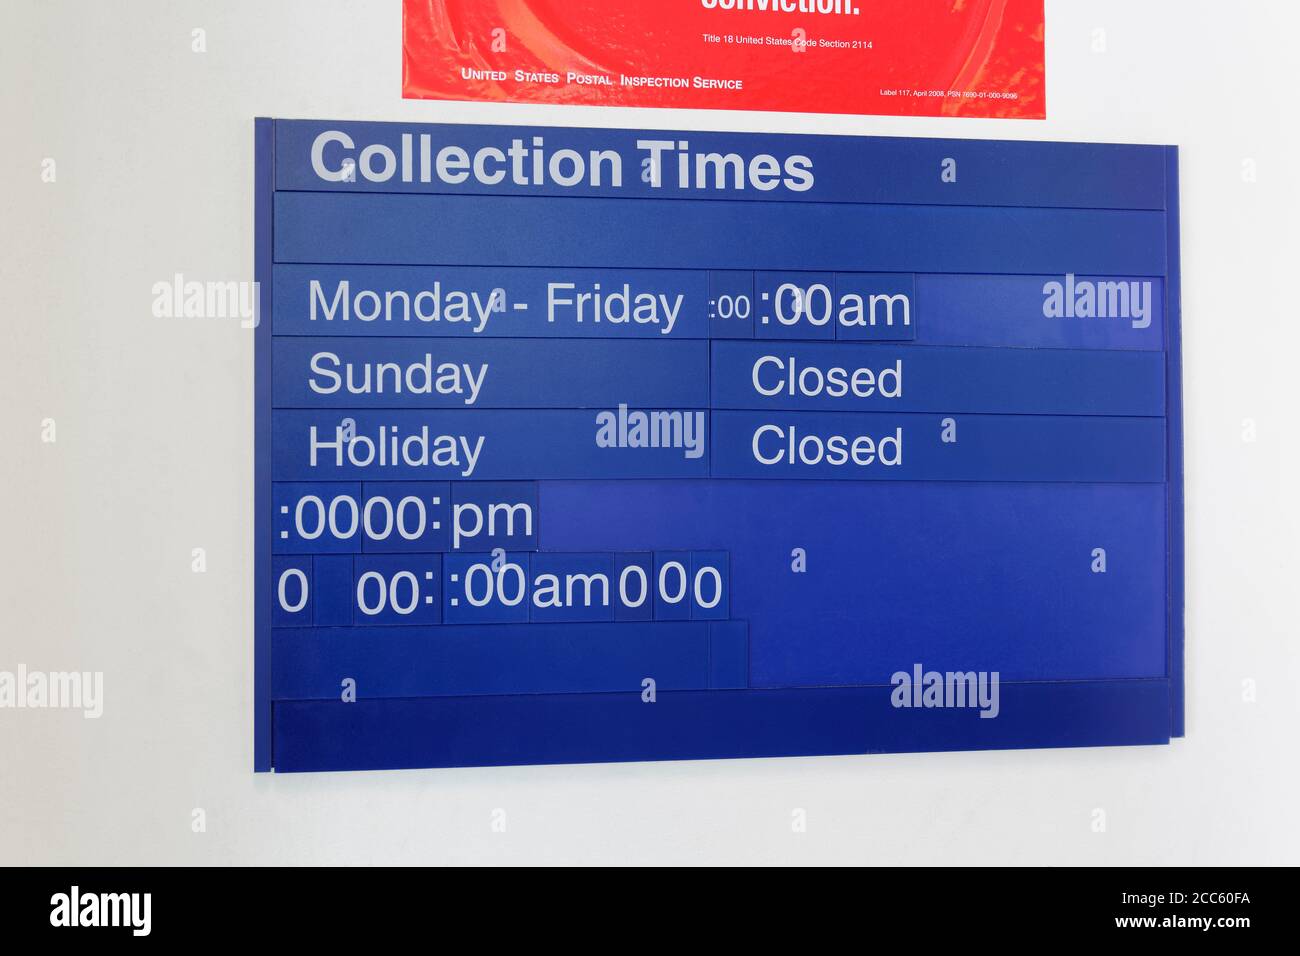 USPS Operating Hours Stock Photo